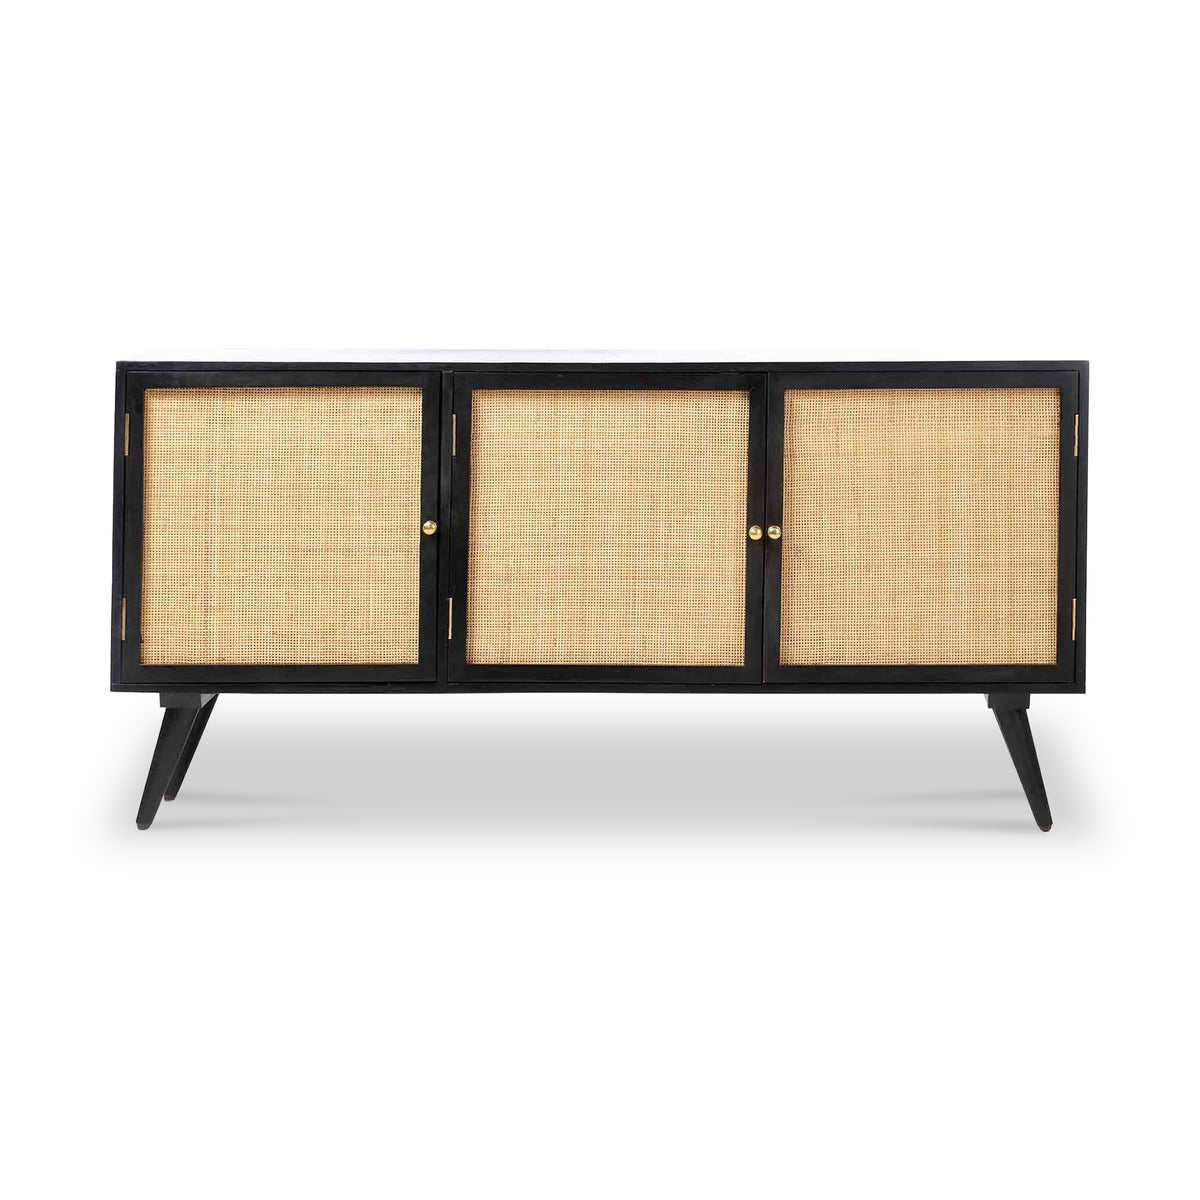 Venti Mango and Cane Large Sideboard from Roseland Furniture